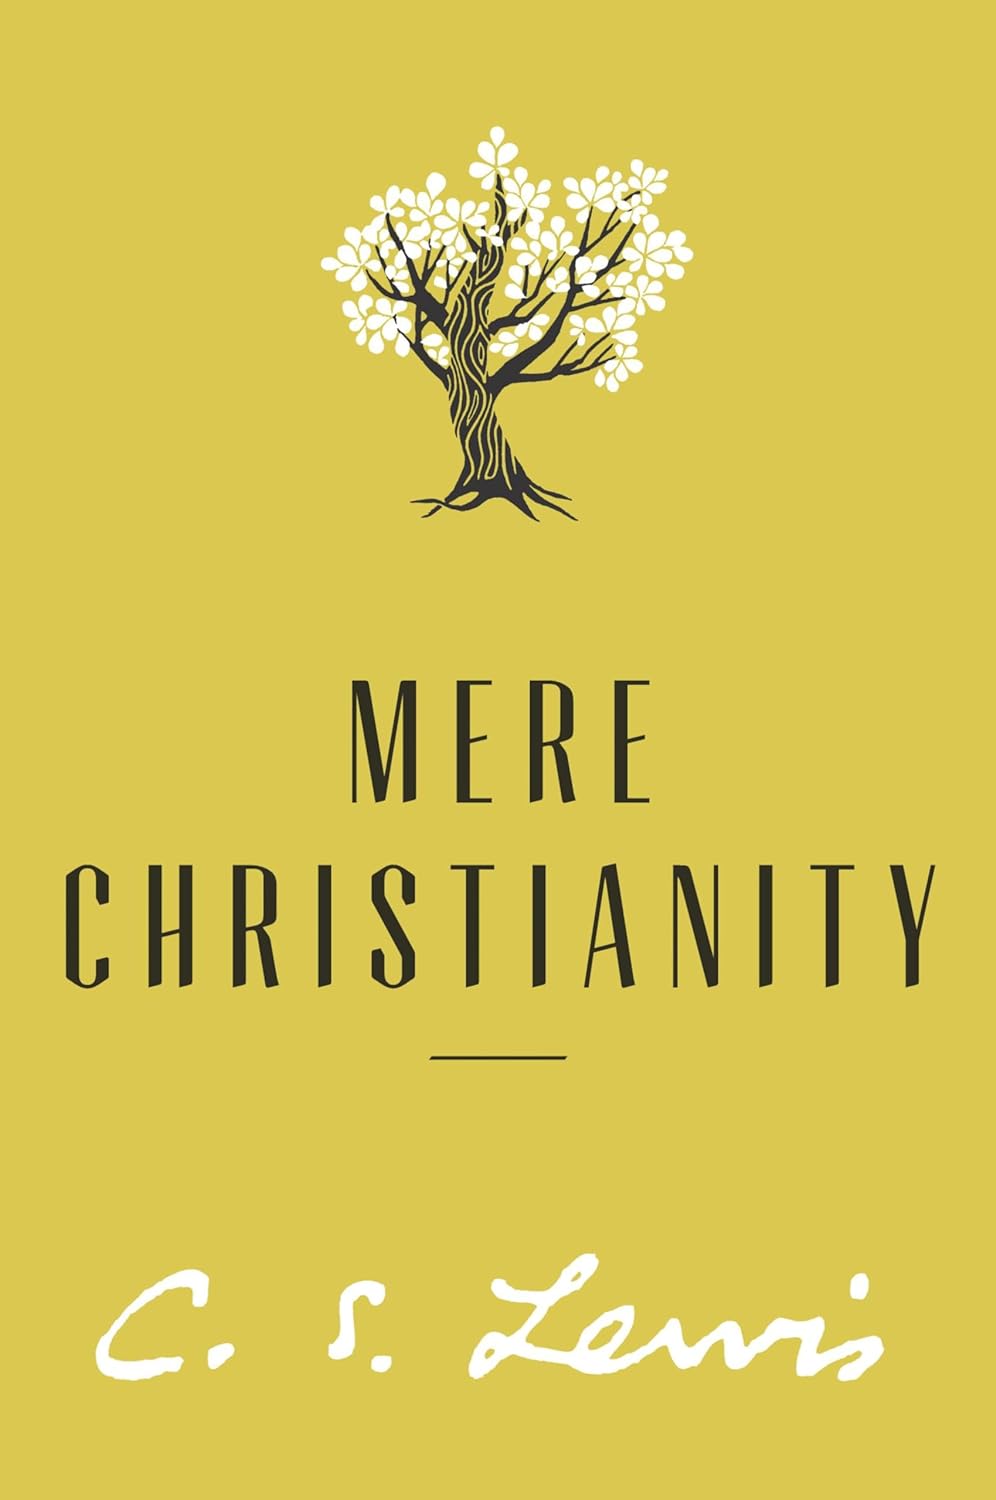 (Book) Mere Christianity